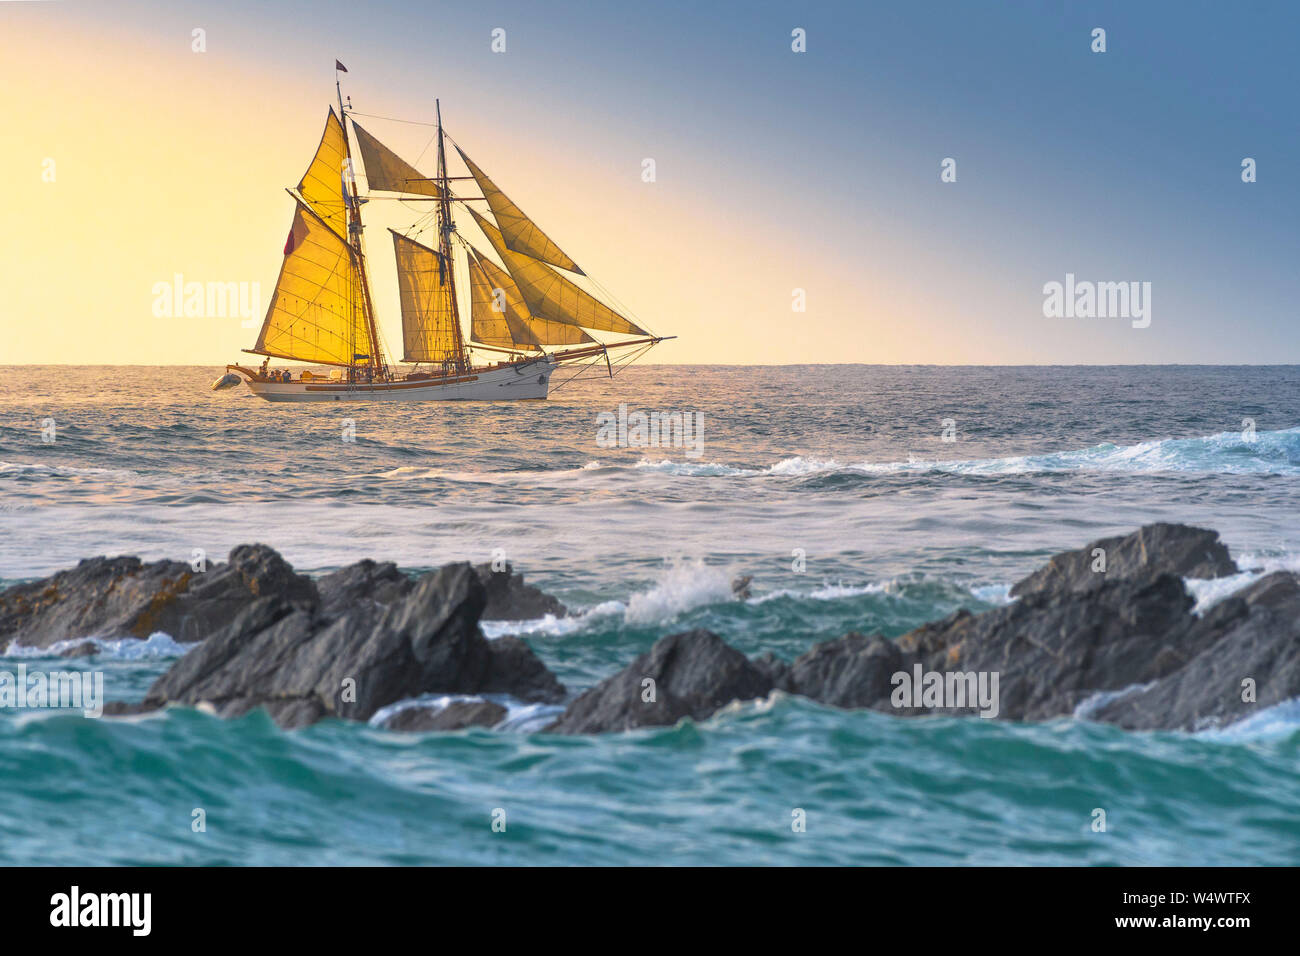 The schooner Anny owned by Rolf Munding under full sail sailing past Fistral in Newquay in Cornwall. Stock Photo